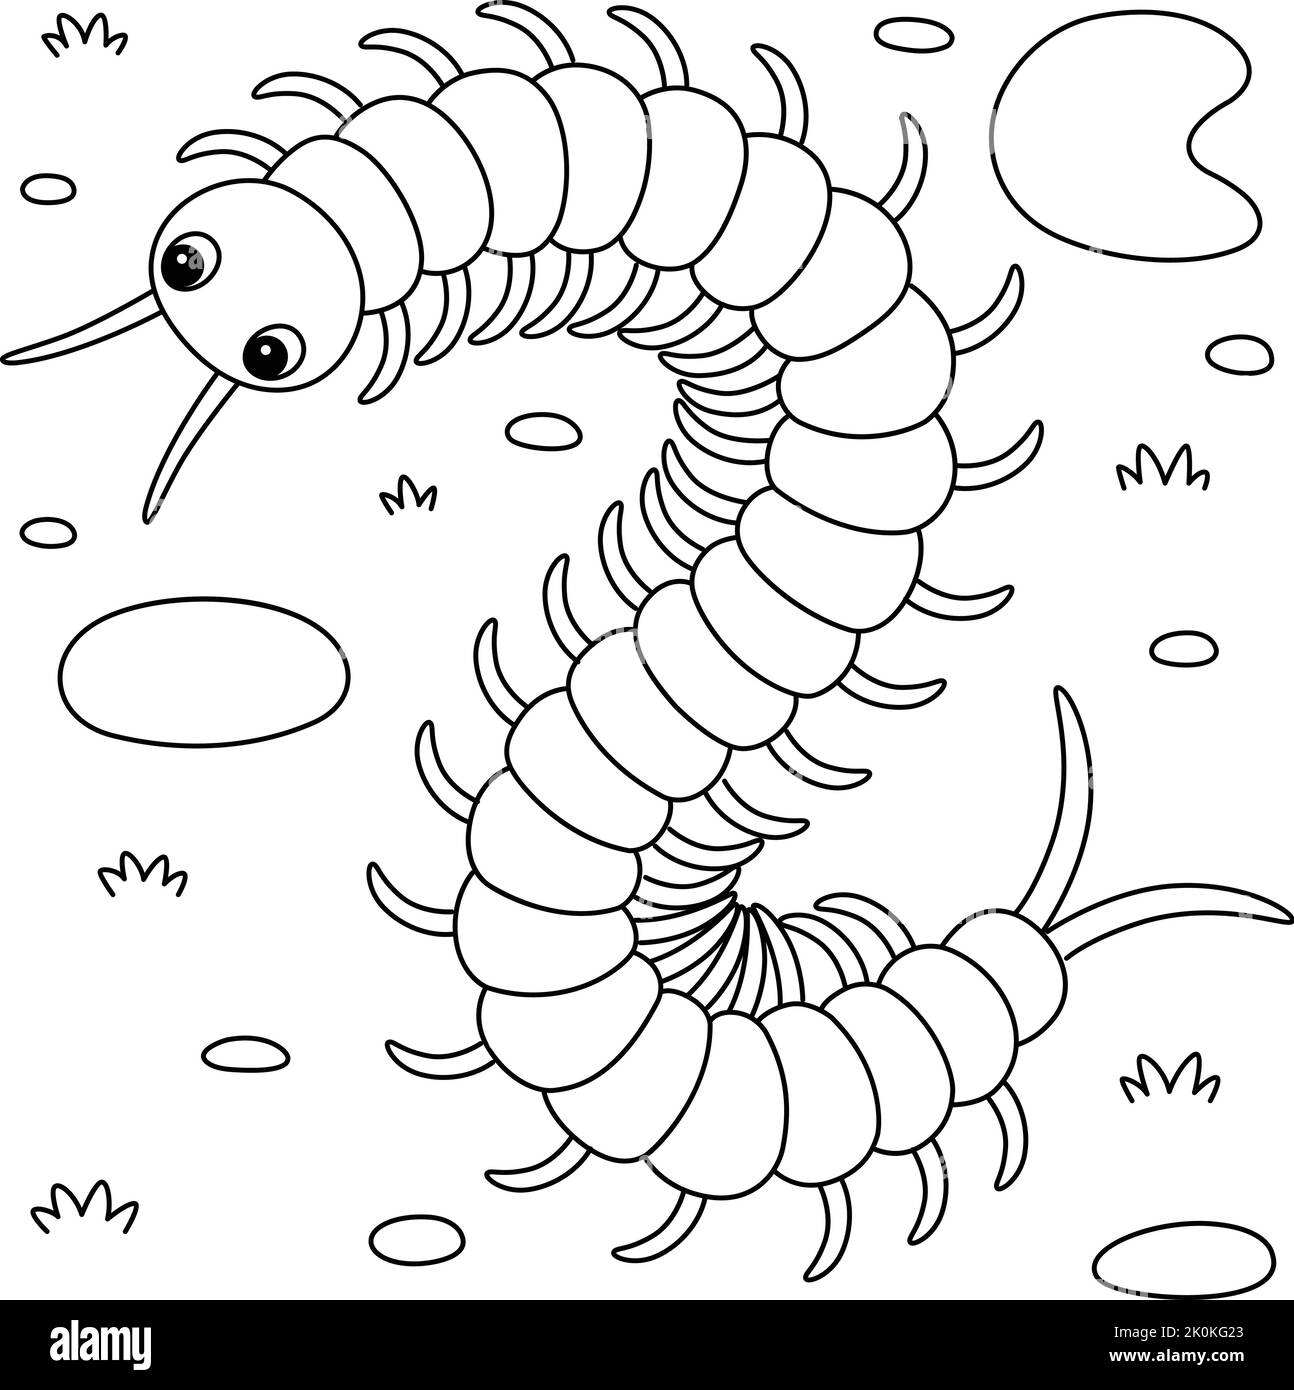 Centipede Animal Coloring Page for Kids Stock Vector